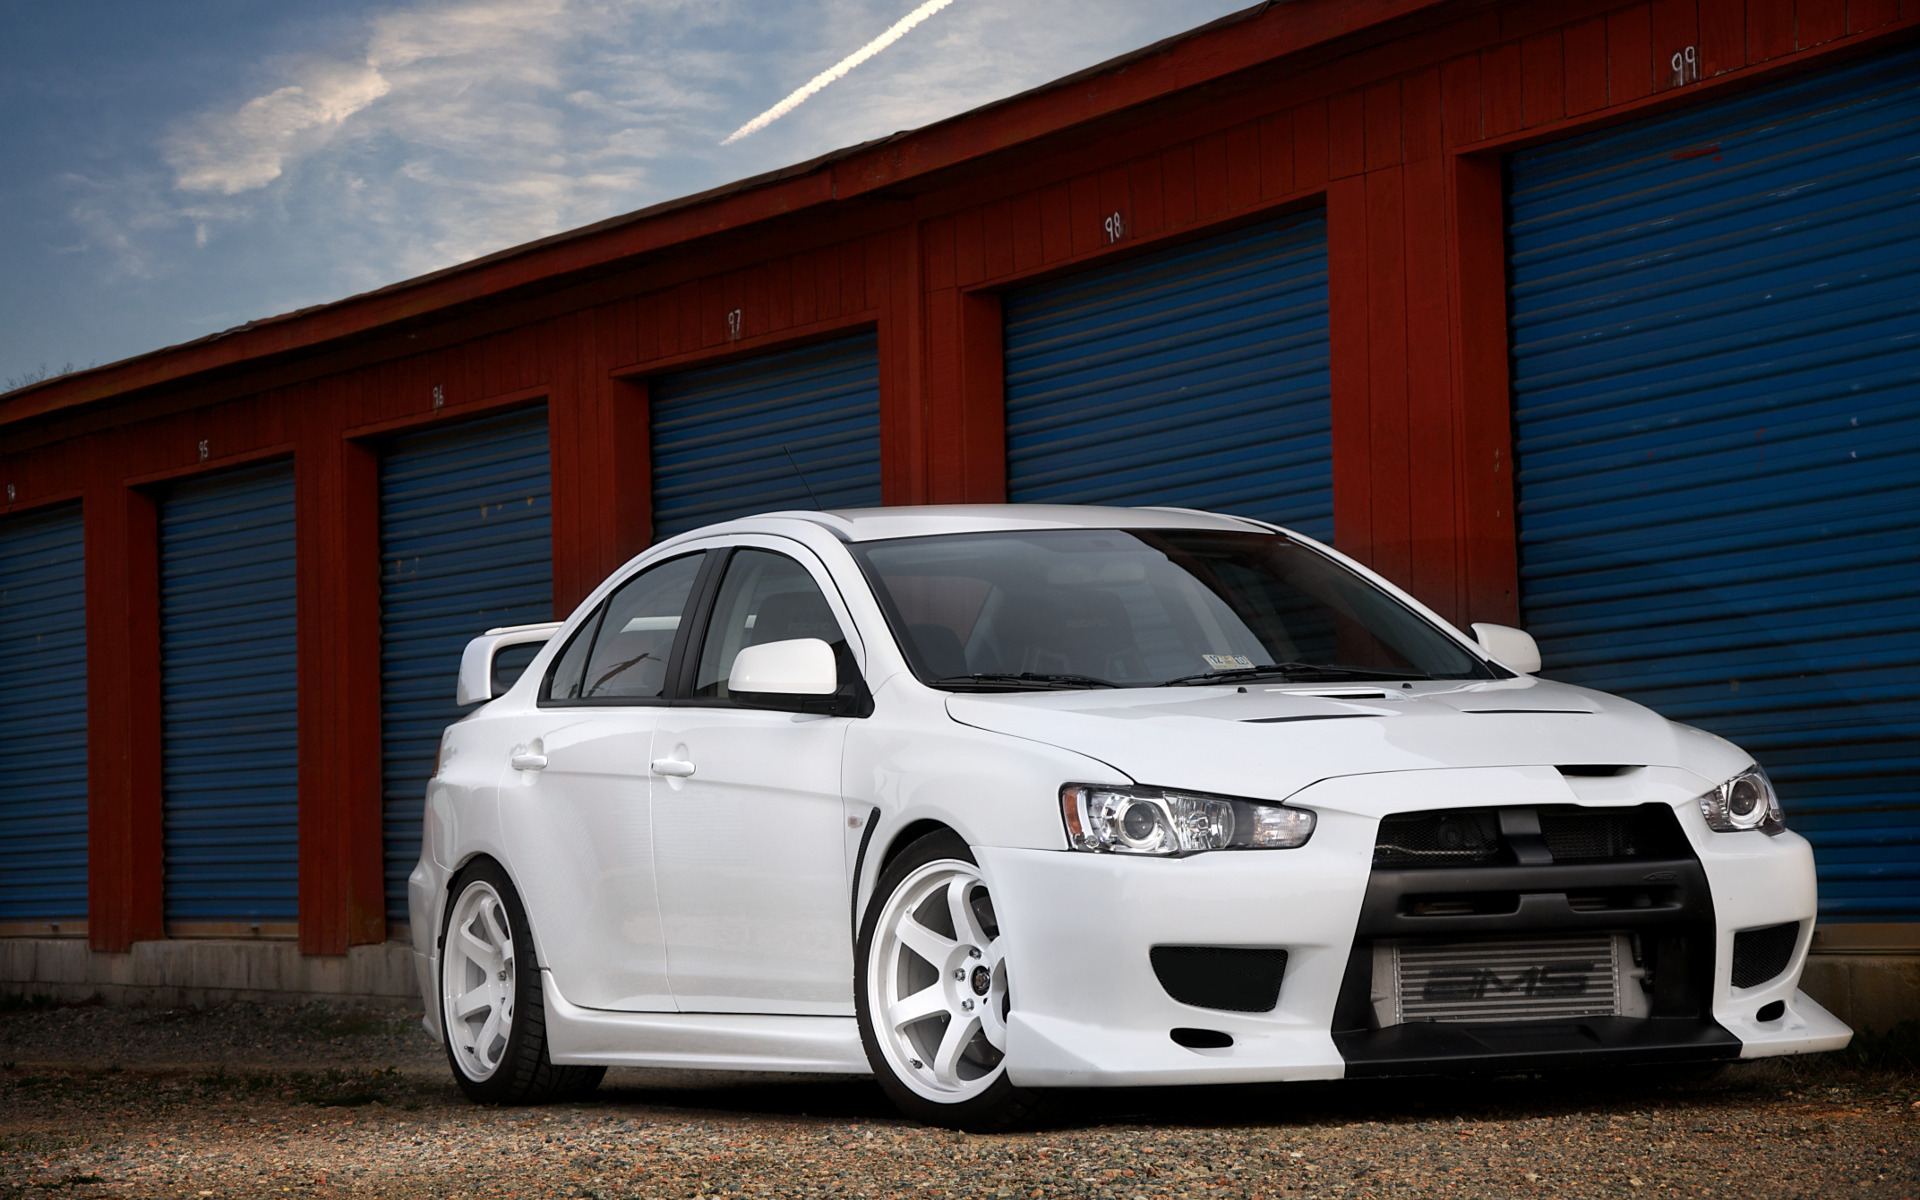 Mitsubishi Lancer Evo X wallpapers and images wallpapers